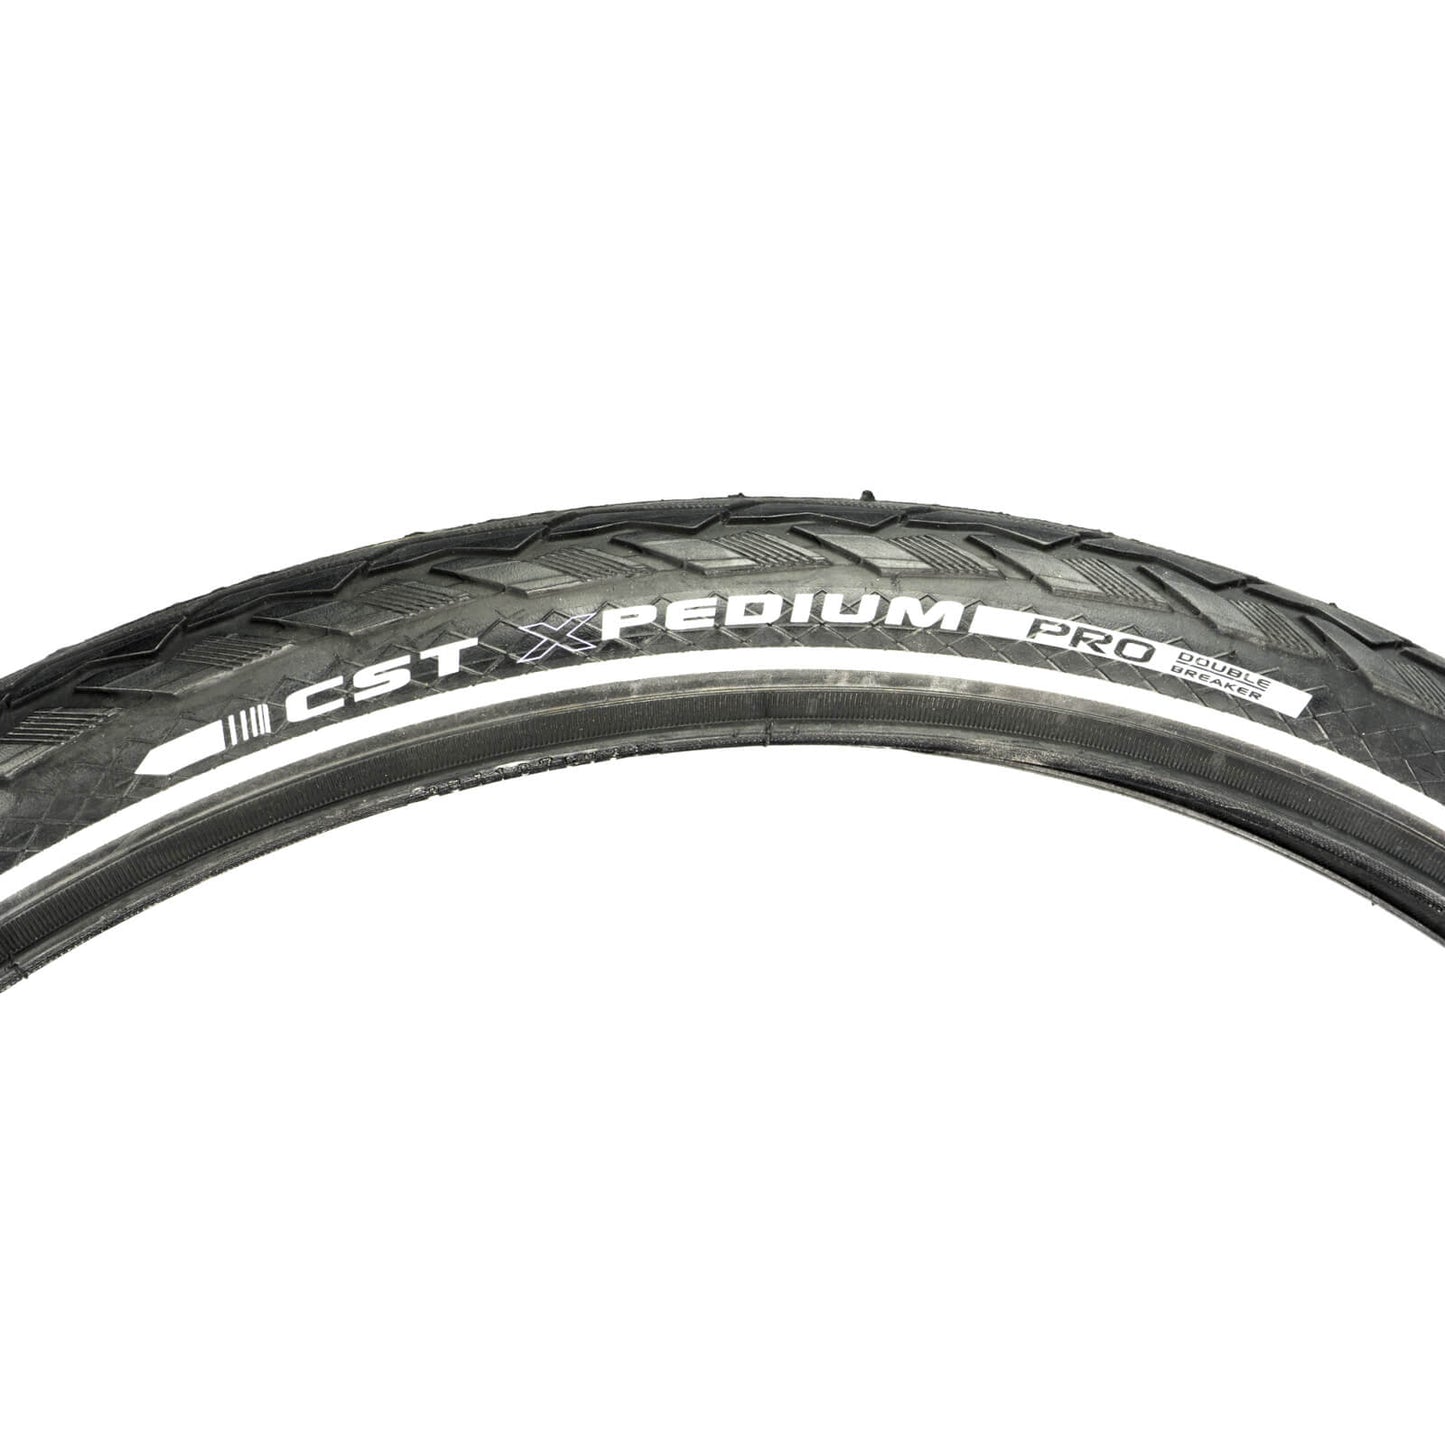 CST Xpedium Level 6 Single Compound Wire DB 26x1.75" 26 Inch Clincher Bike Tyre